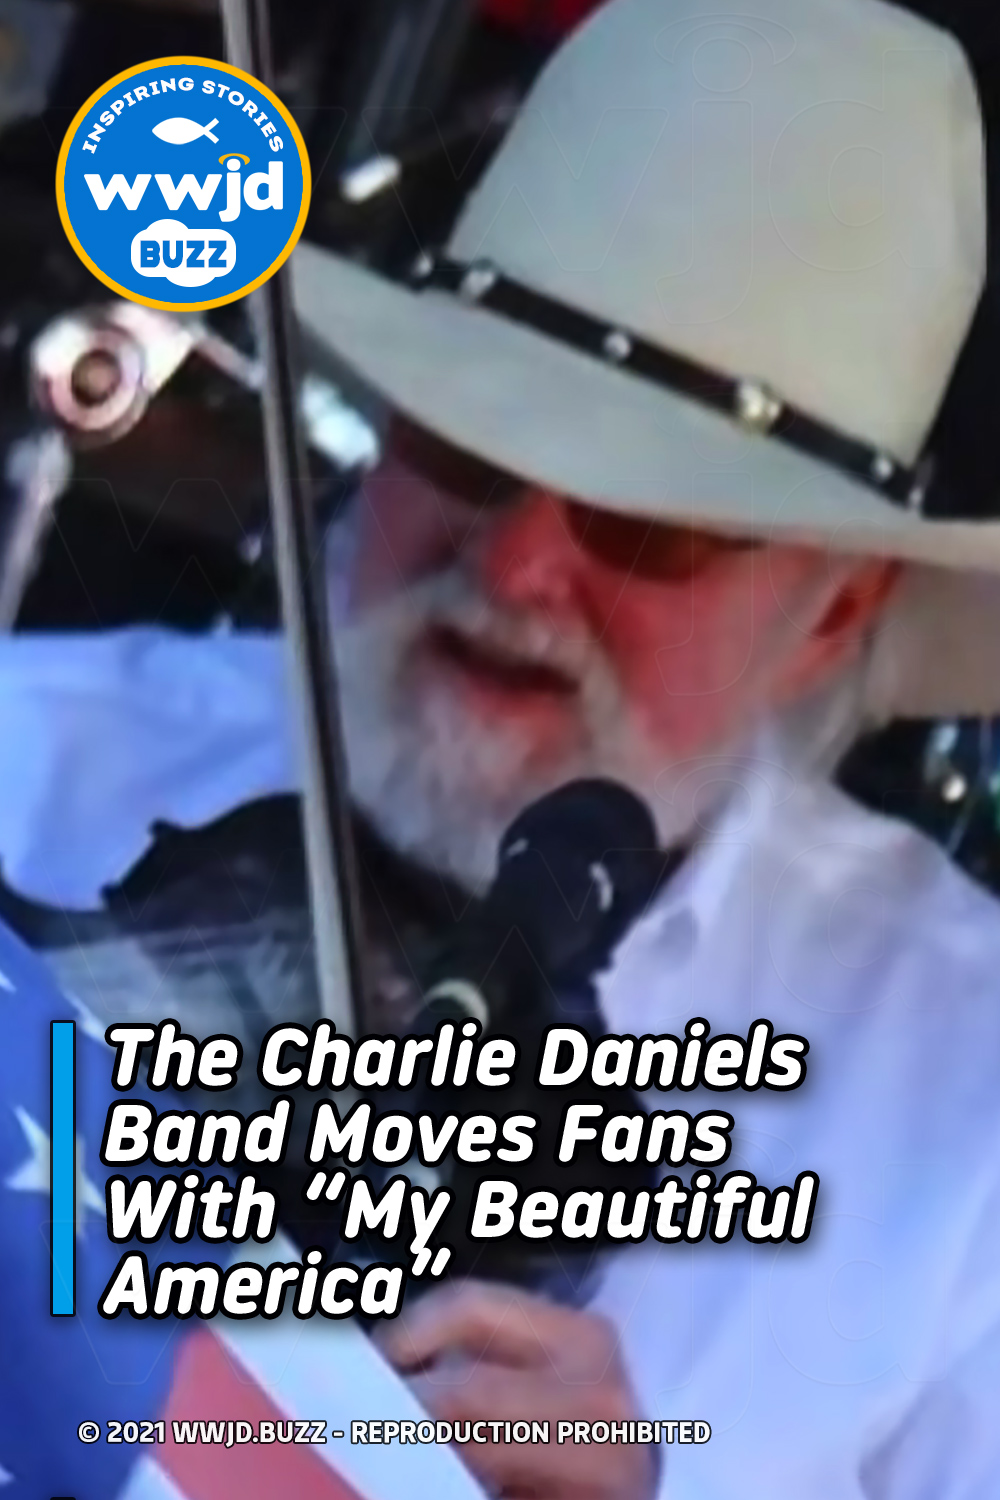 The Charlie Daniels Band Moves Fans With “My Beautiful America”